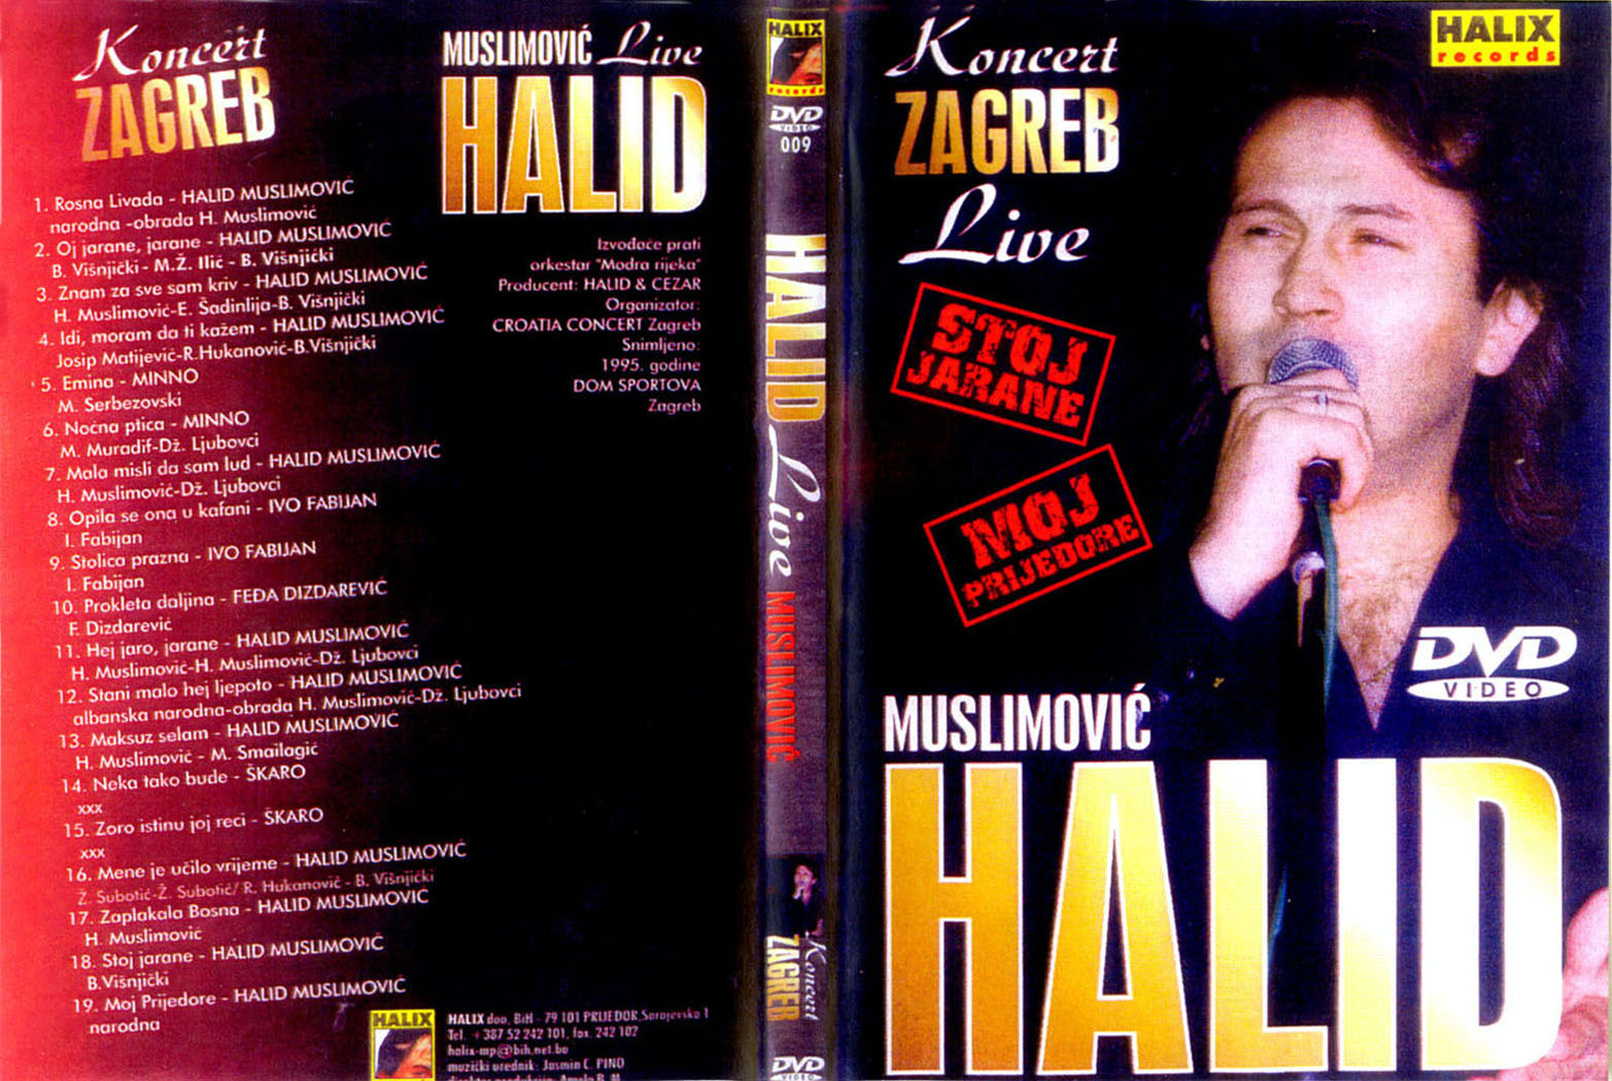 Click to view full size image -  DVD Cover - H - halid_muslimovic_zagreb_v2_dvd - halid_muslimovic_zagreb_v2_dvd.jpg